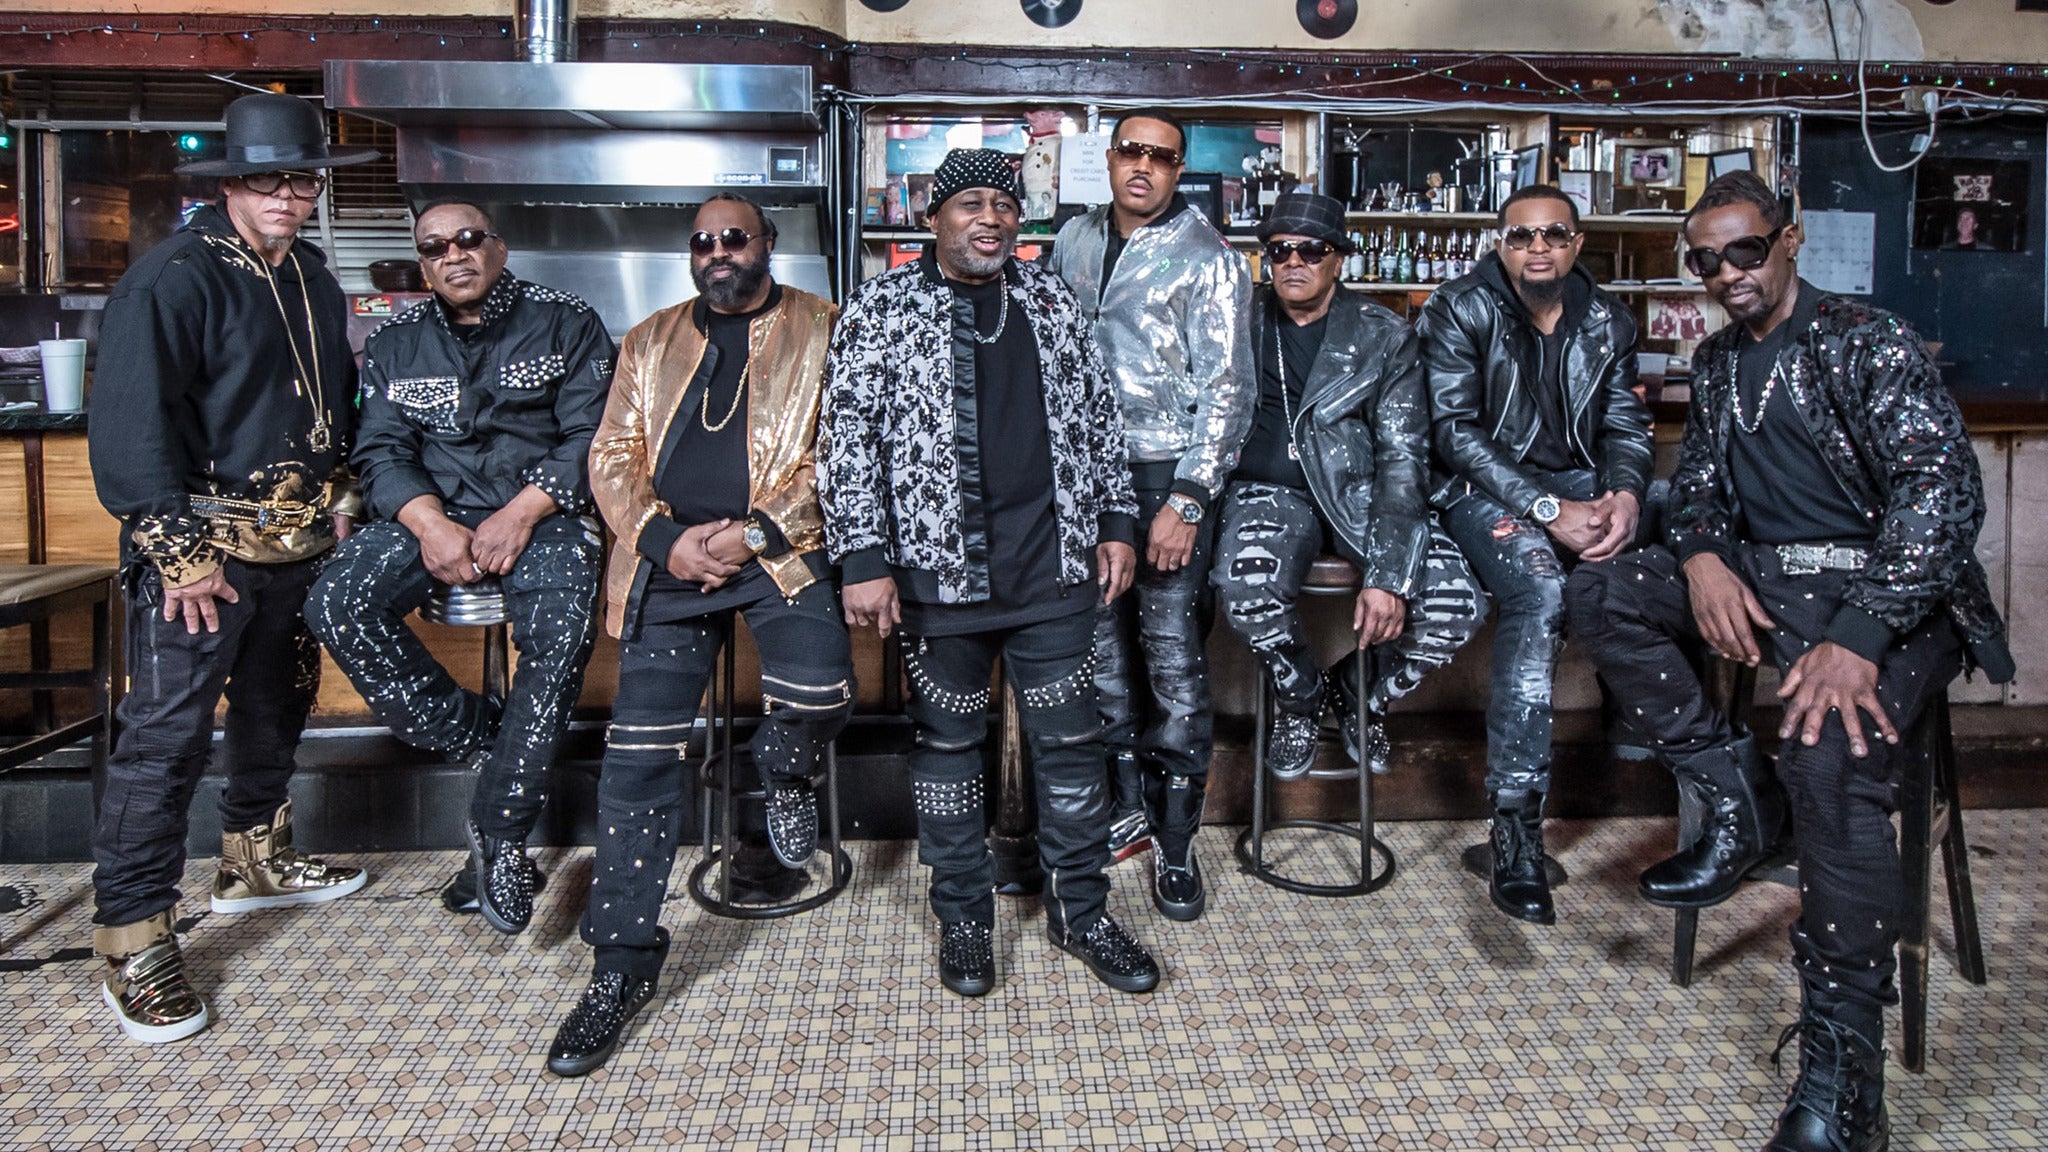 Funk/R&B/Comedy Fest: Bar-Kays, Don "DC" Curry, Freddie Jackson in Mableton promo photo for Mable House presale offer code